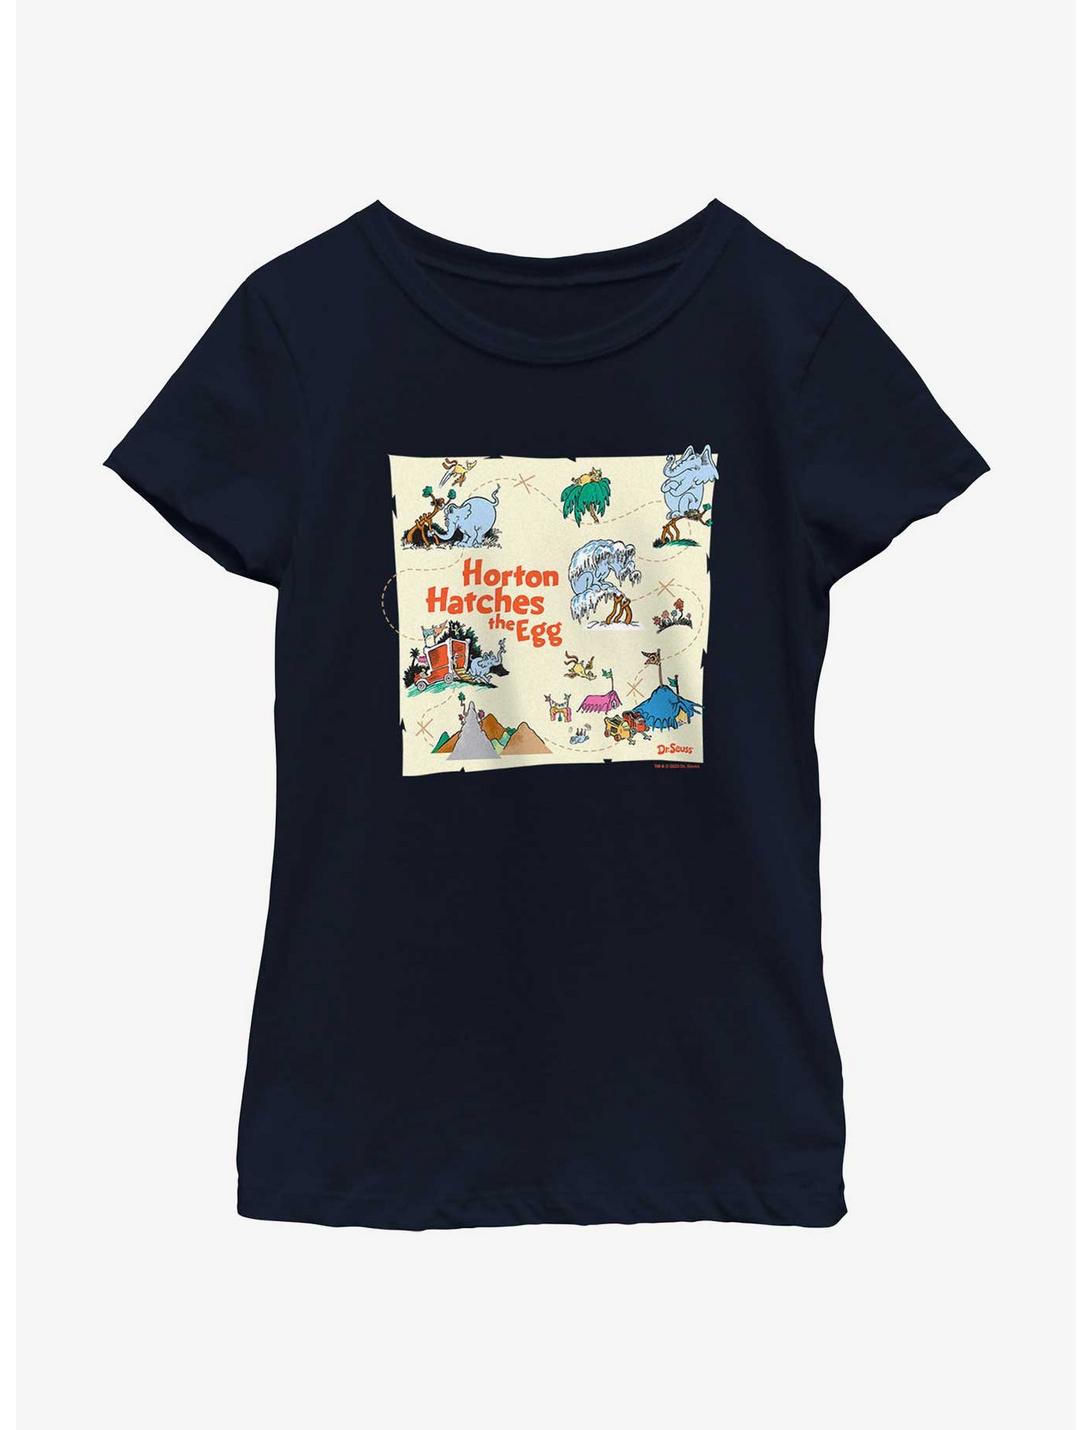 Dr. Seuss's Horton Hatches The Egg Map Youth Girls T-Shirt, NAVY, hi-res